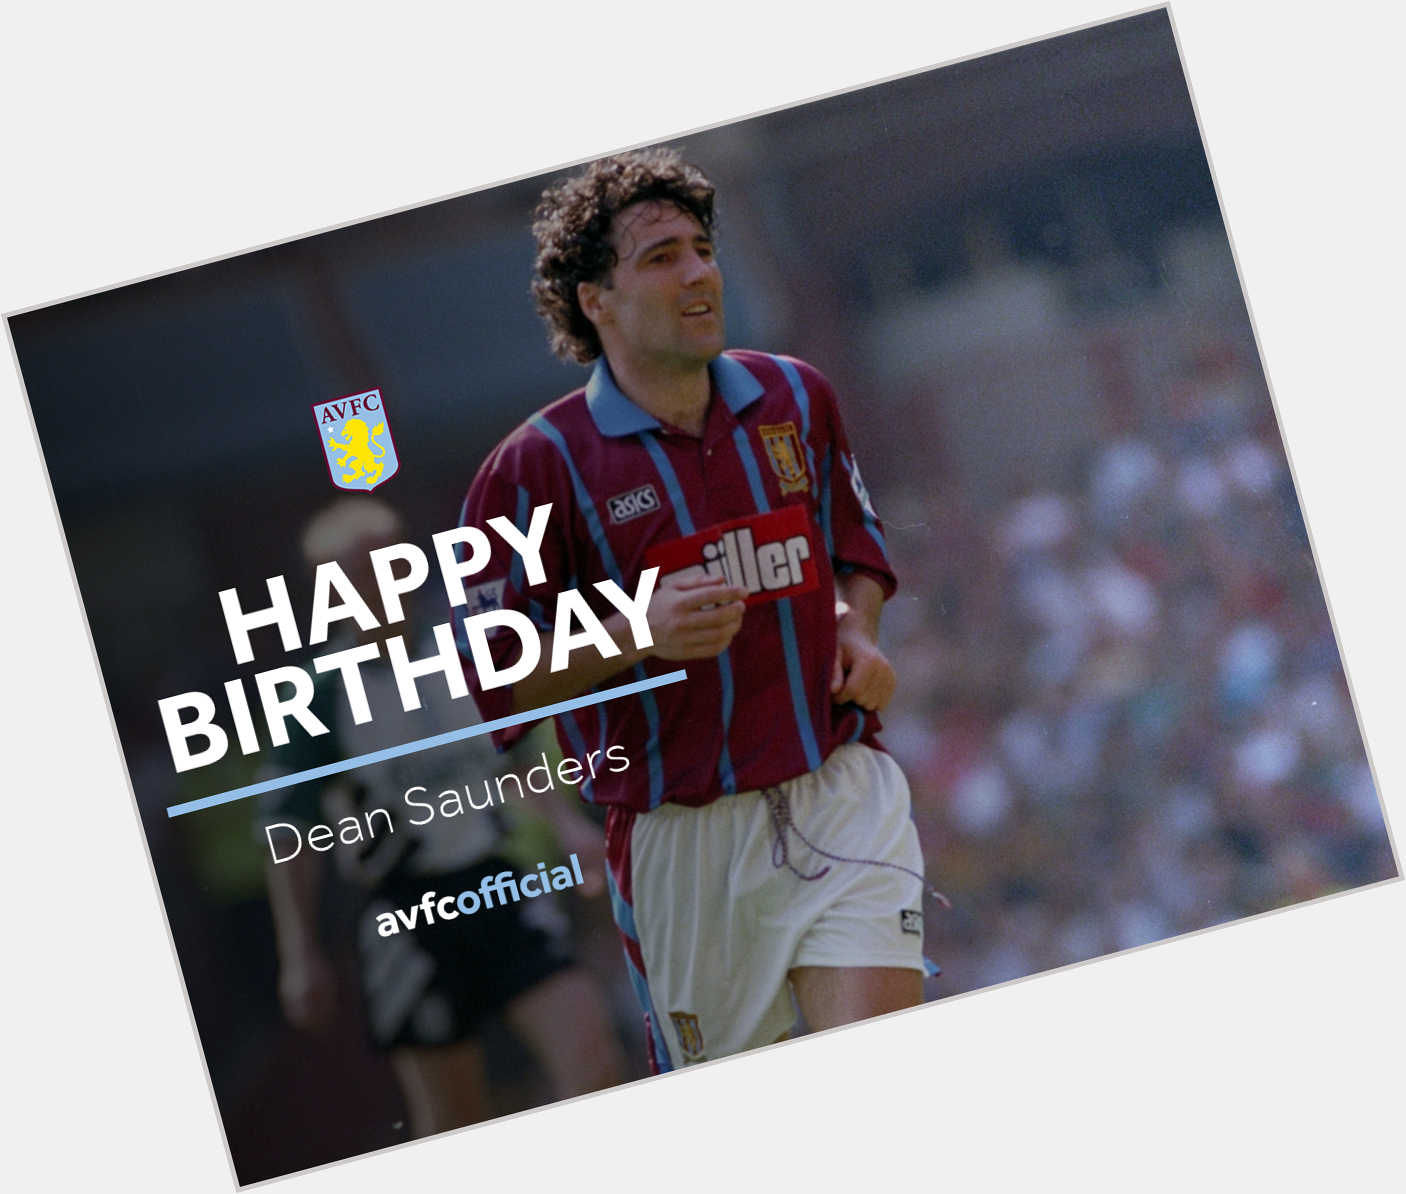  We\re also saying happy birthday to Dean Saunders!
 
Hope you\ve had a great day Deano! 